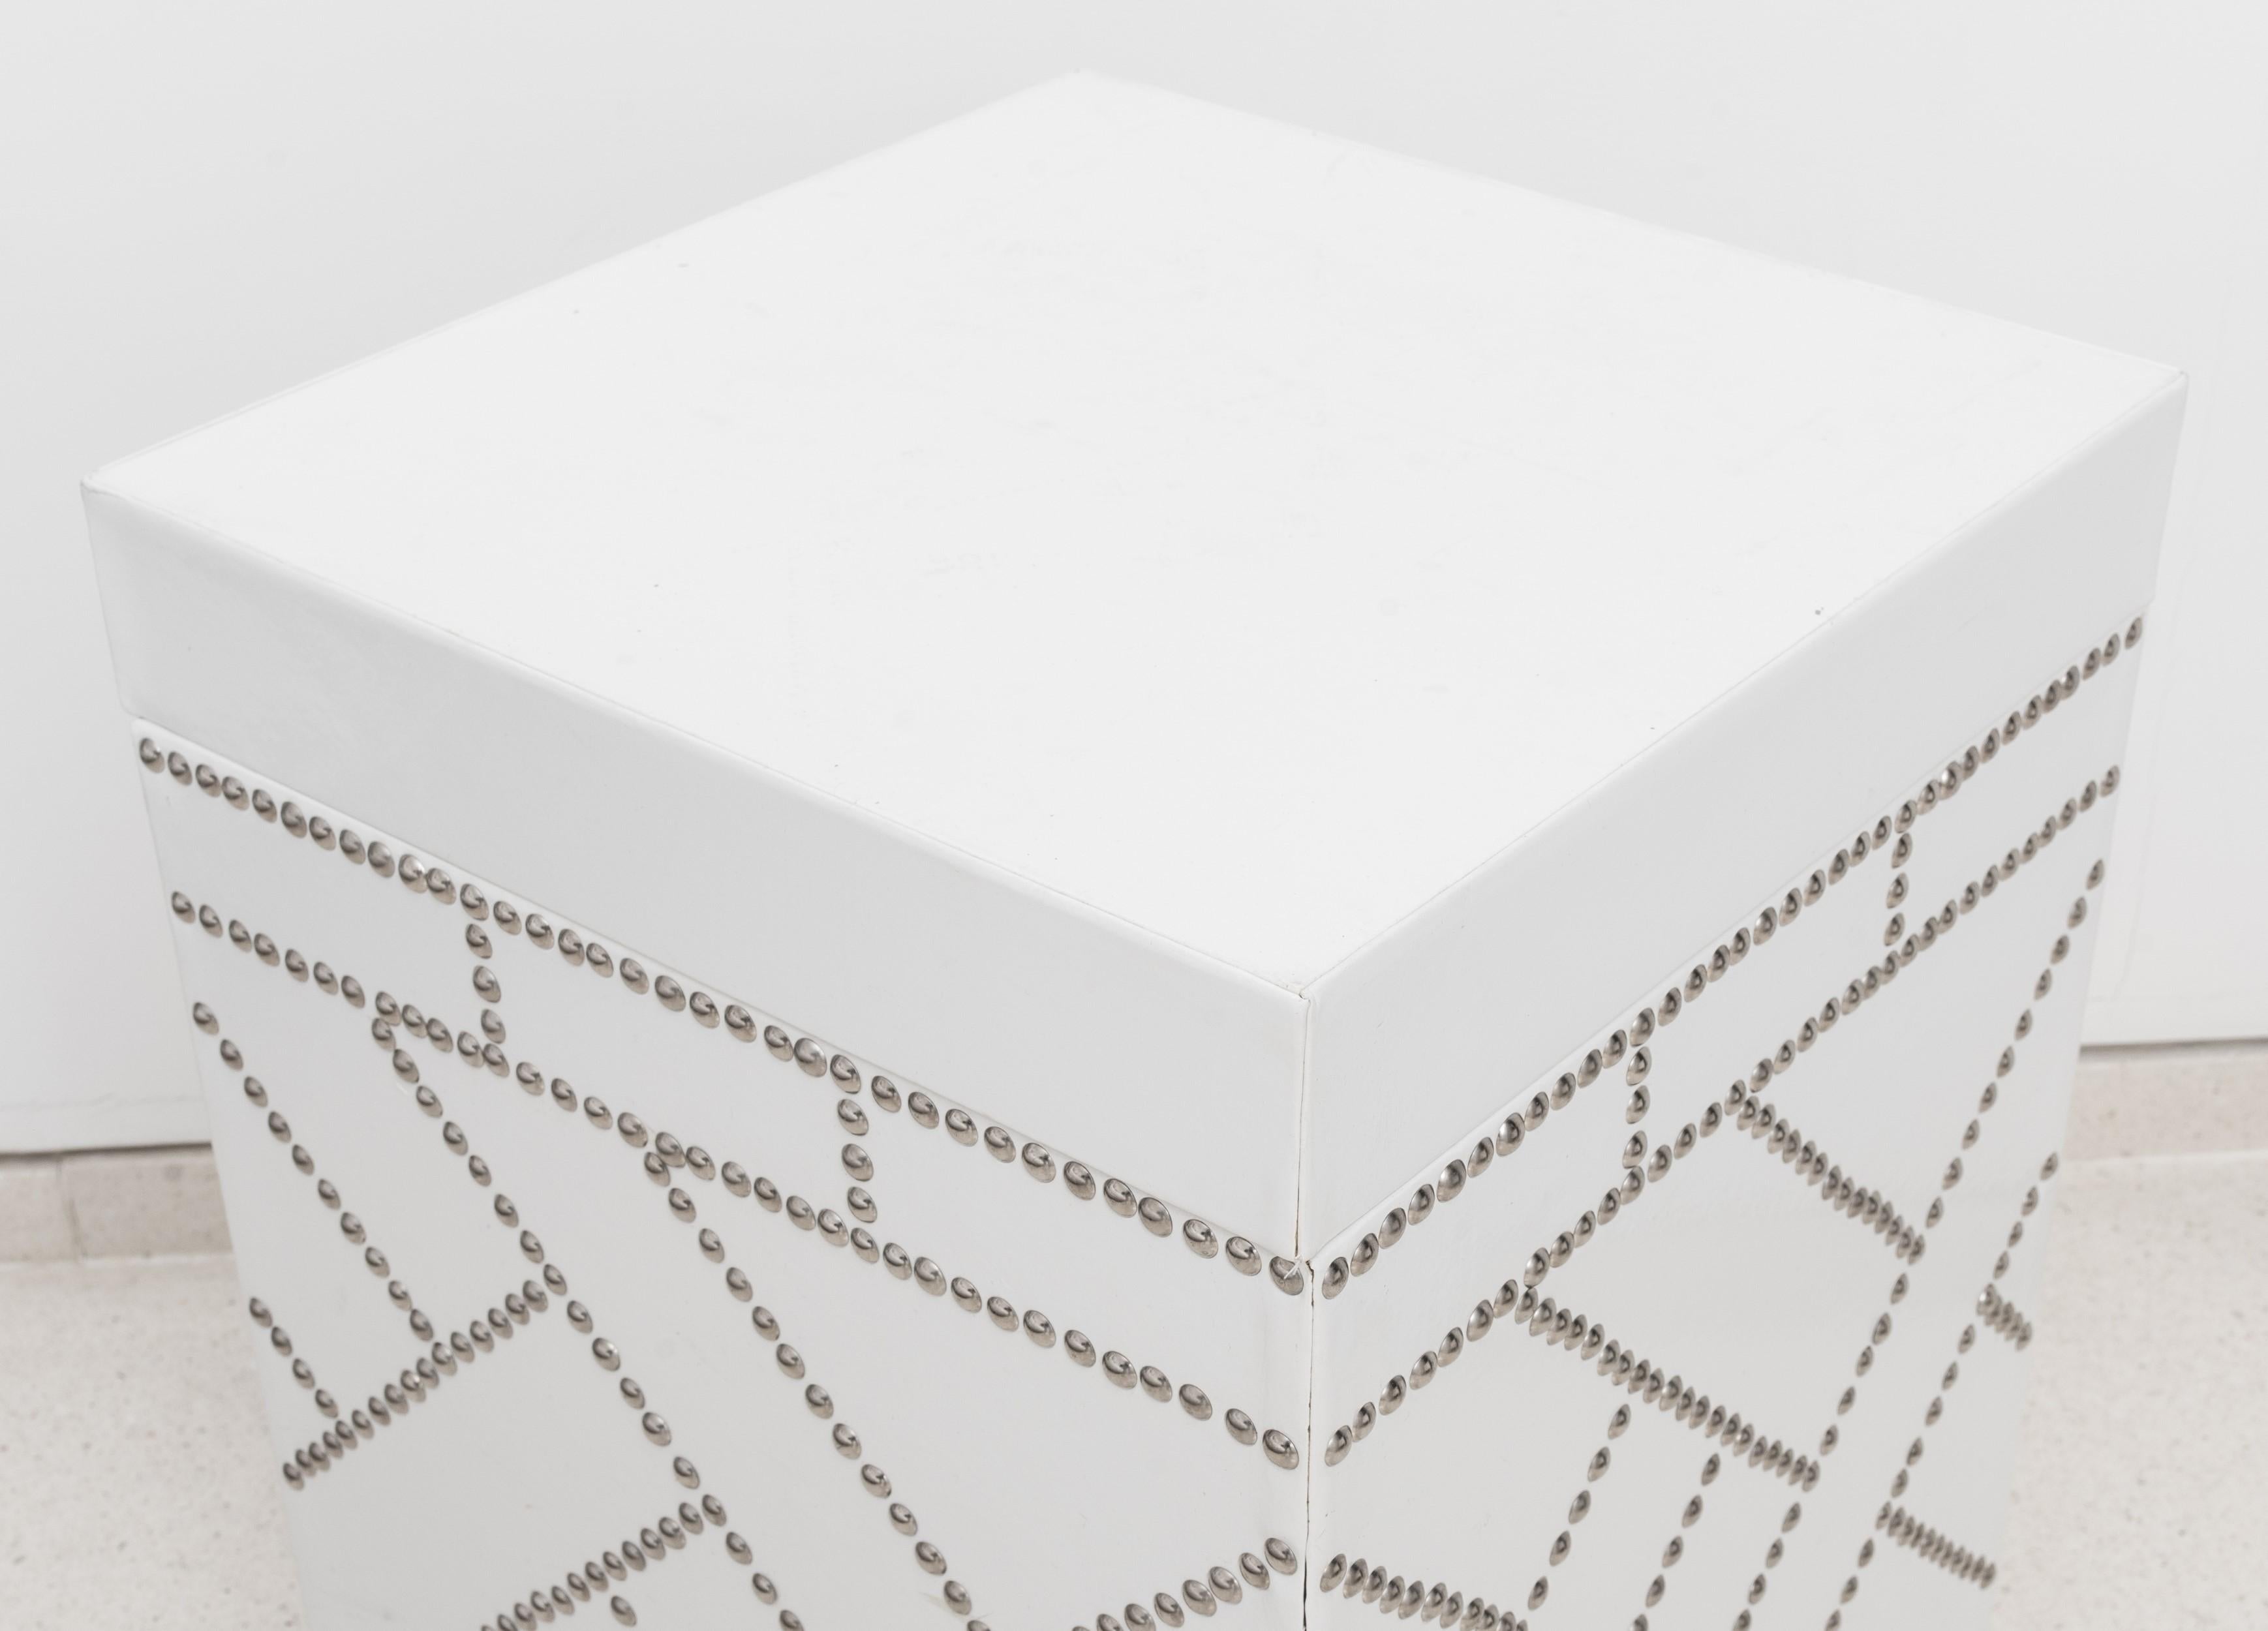 The Palm Beach glam white gloss and silver studded end table with lid for storage sounds like a stylish and functional piece of furniture. Here's a summary of its key features:

Style: Palm Beach glam, characterized by a combination of white gloss